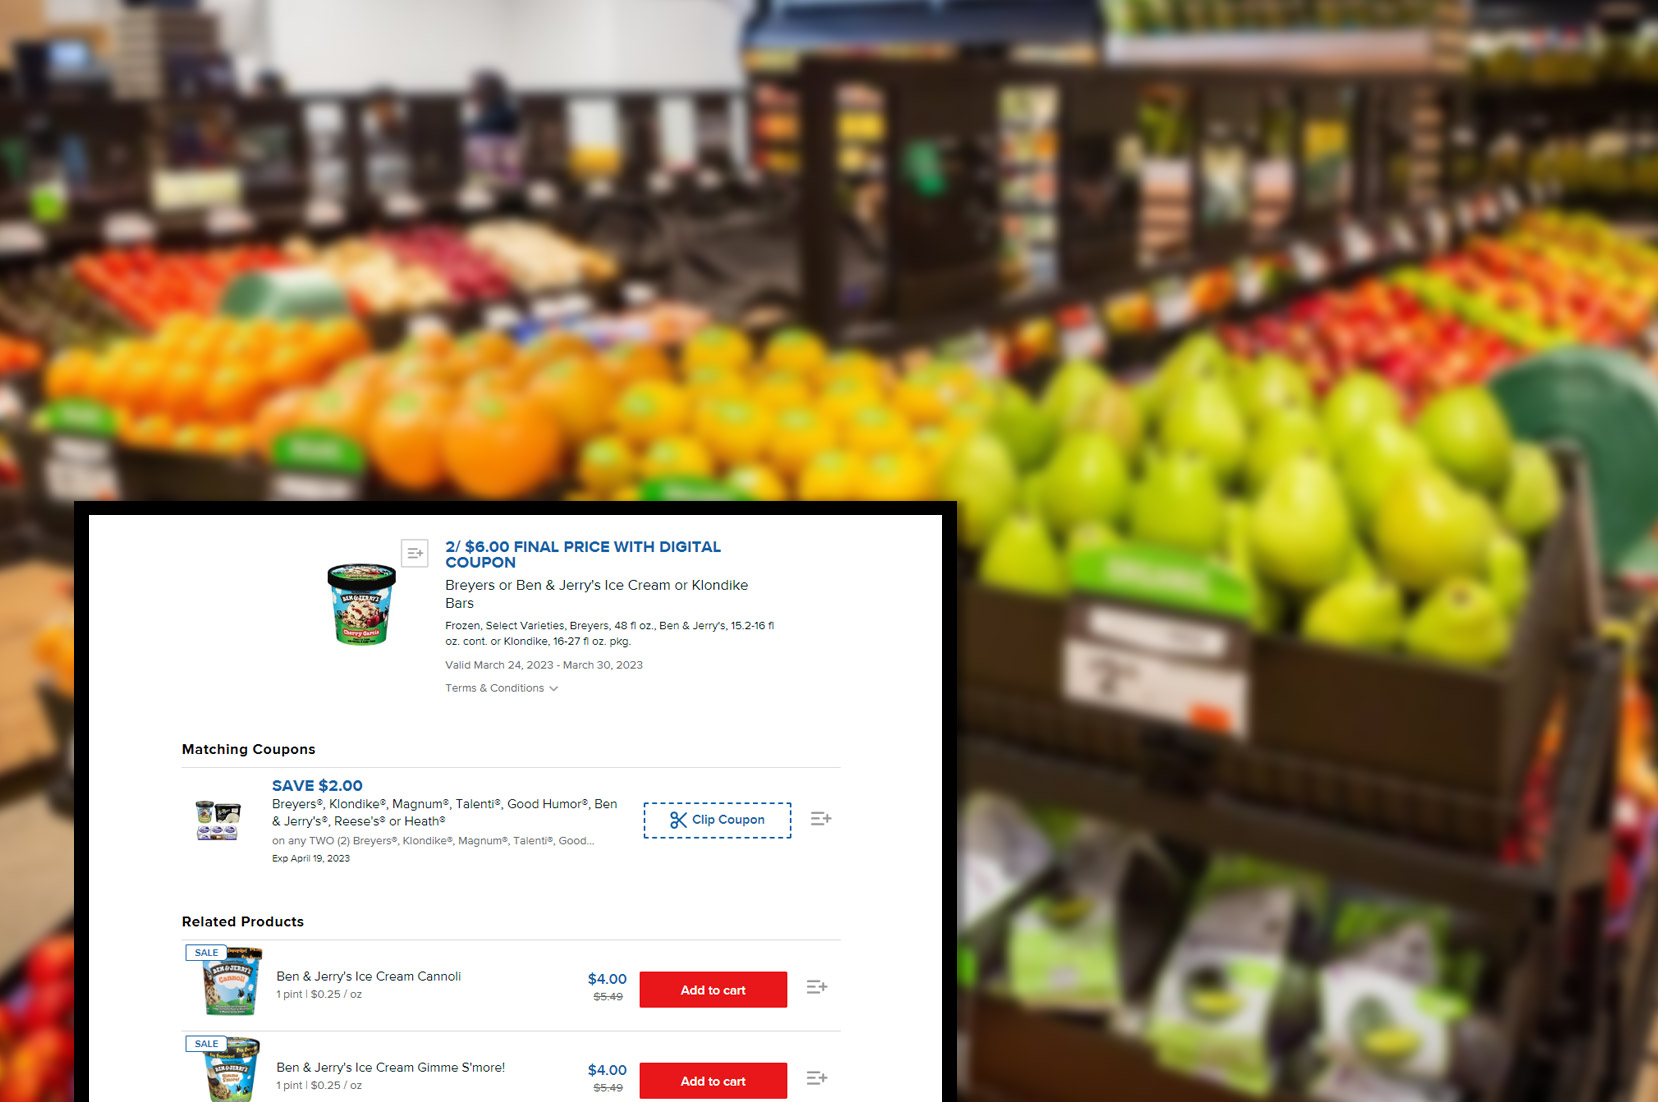 giantfoodstores-comproduct-pricing-information-and-image-scraping-services